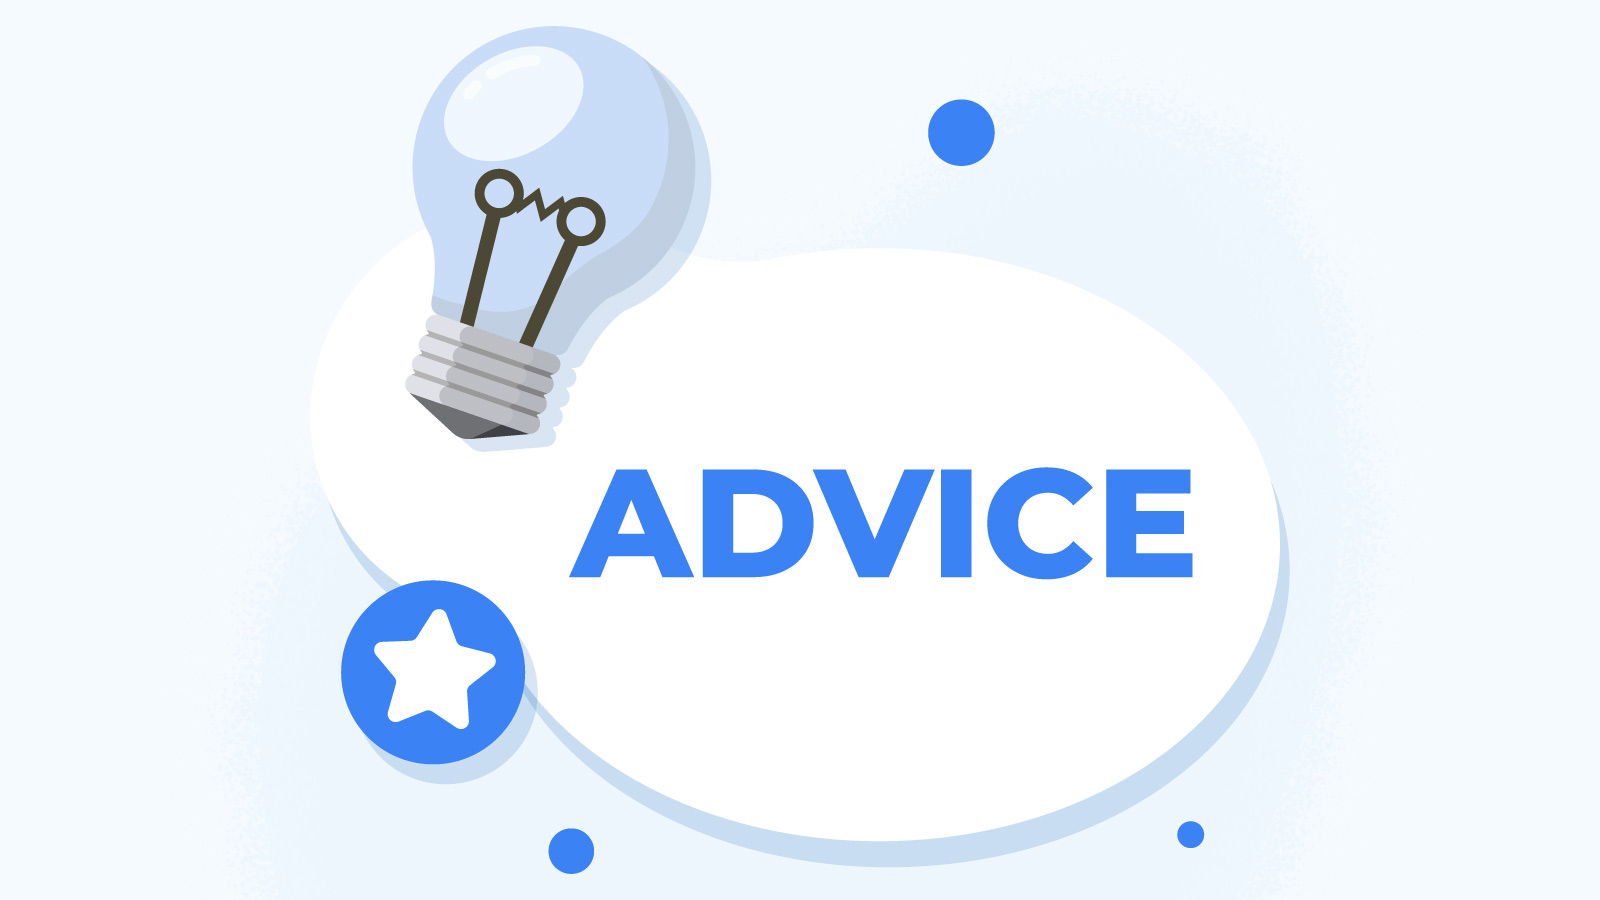 Advice from our experts